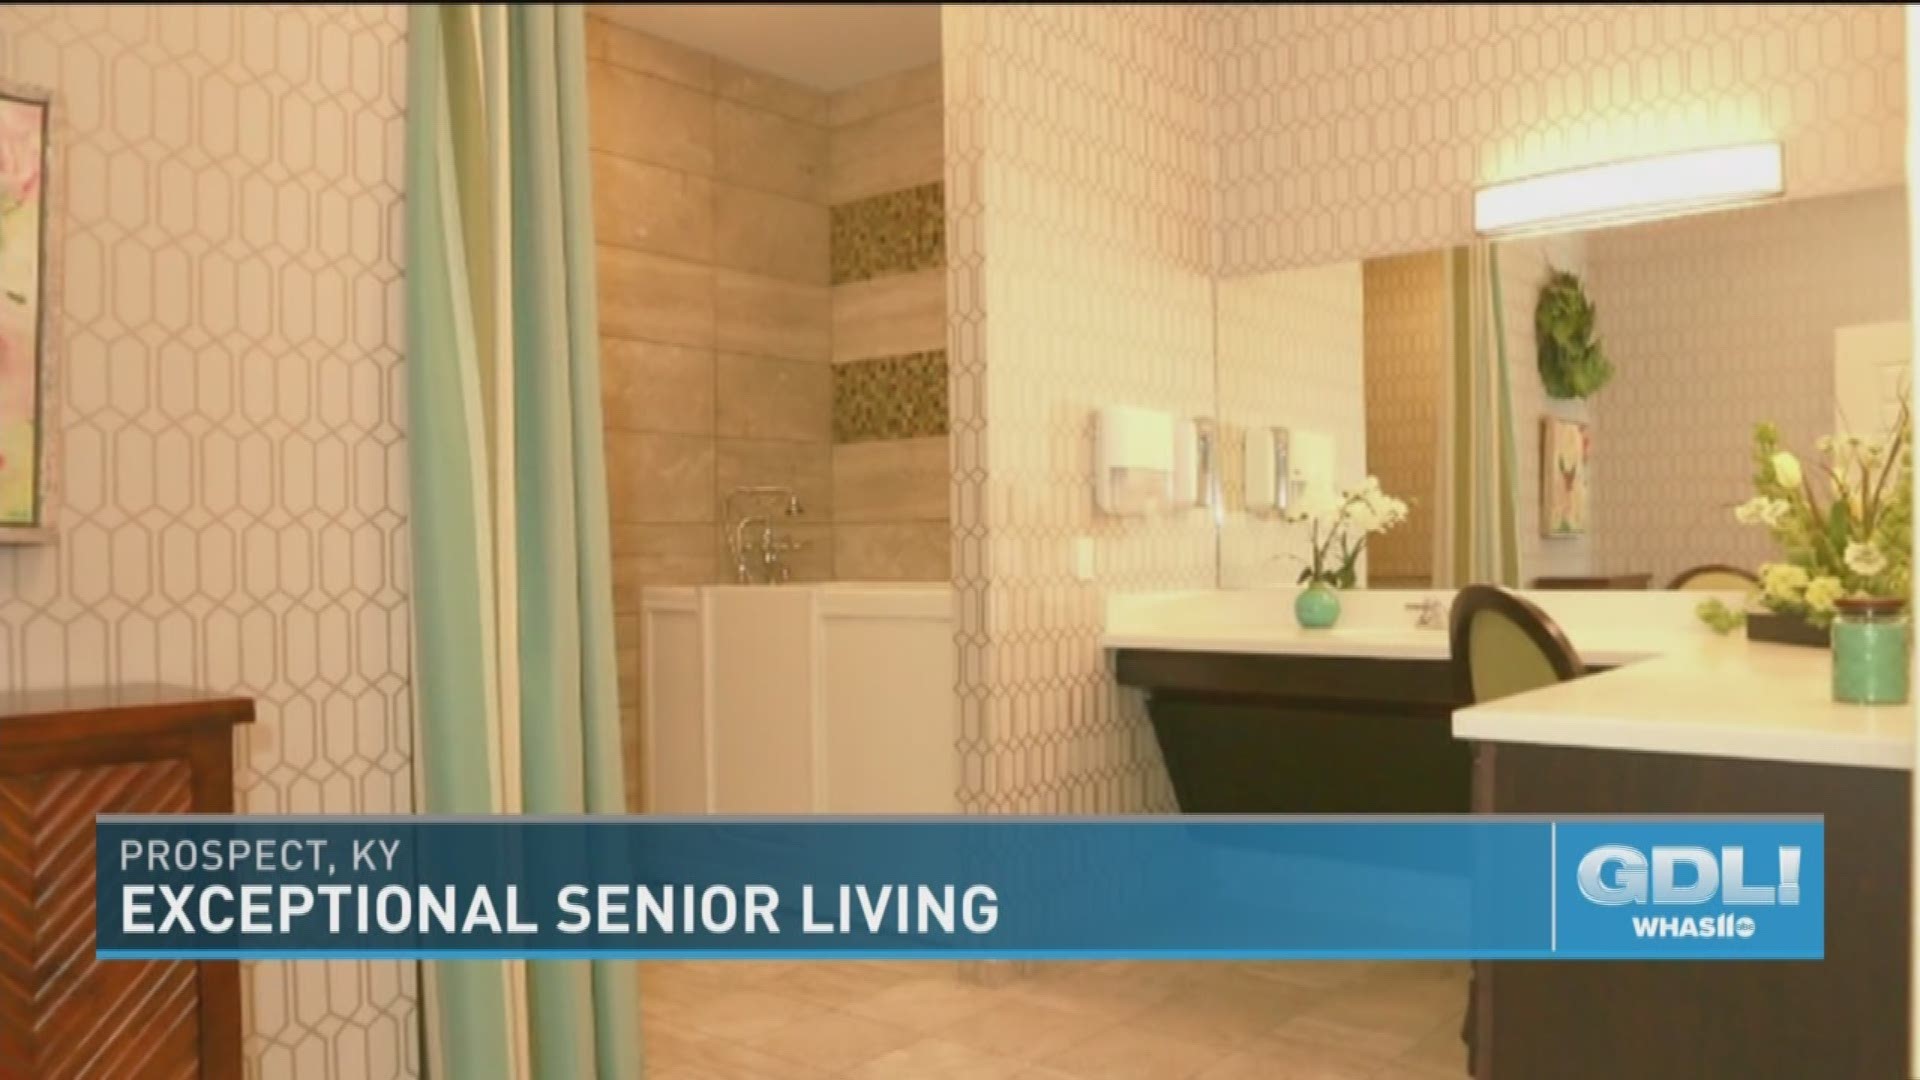 Exceptional Senior Living is located at 6901 Carslaw Court in Prospect, KY. For more information, call 502- 907-3778 or go to ExceptionalSeniors.com.